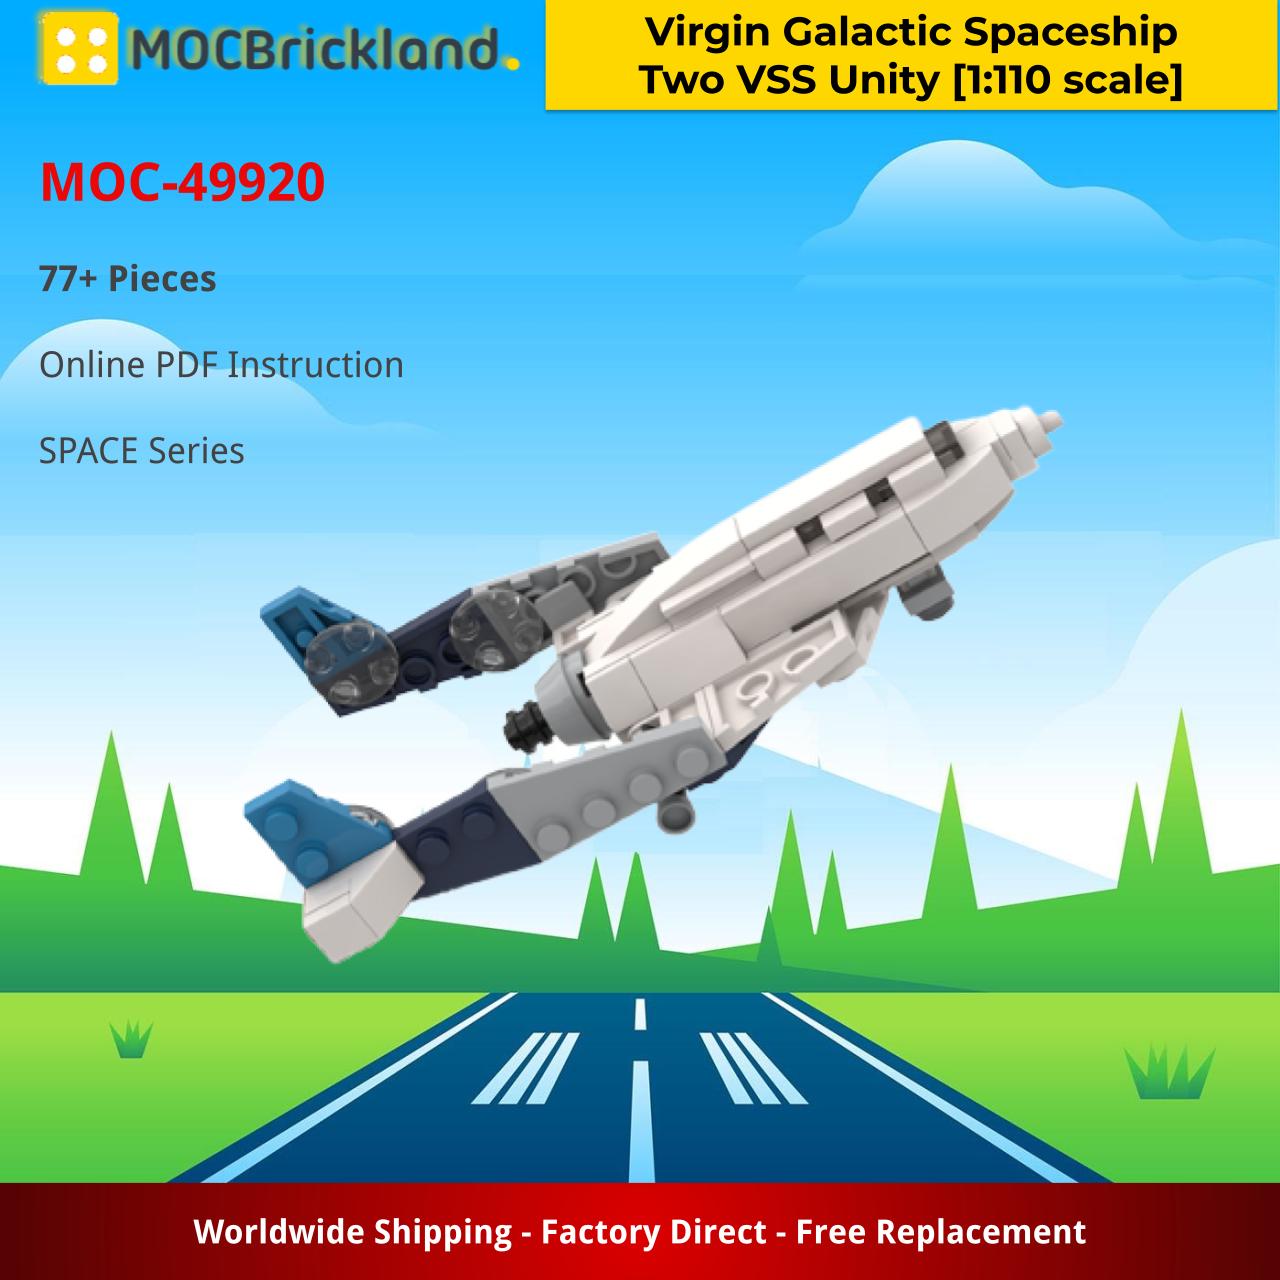 MOCBRICKLAND MOC-49920 Virgin Galactic Spaceship Two VSS Unity [1:110 scale]